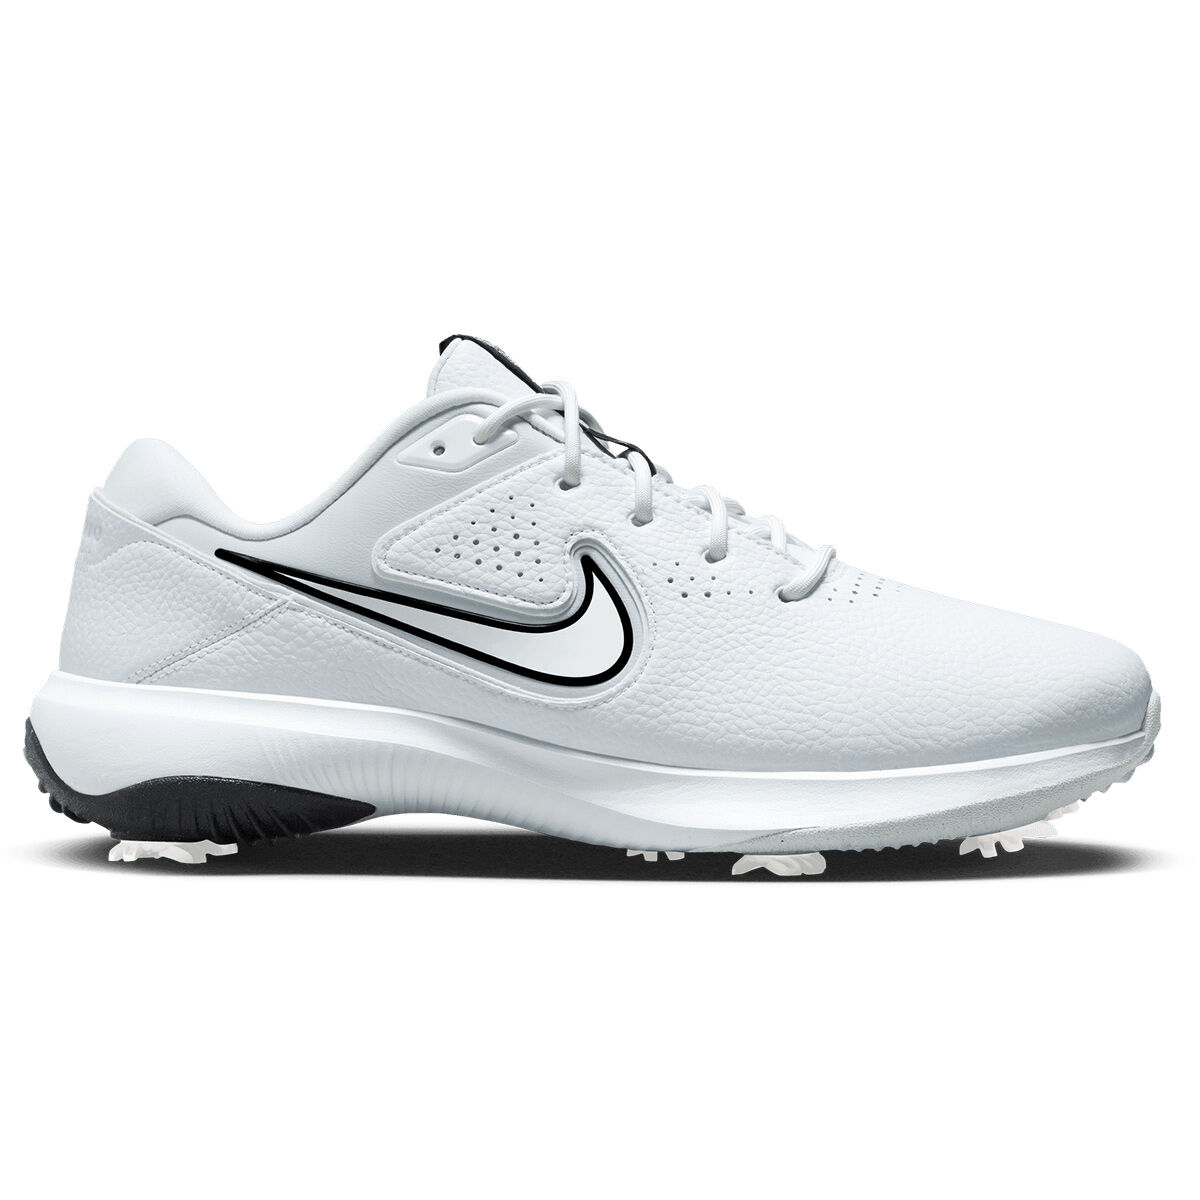 Nike Men’s Victory Pro 3 Waterproof Spiked Golf Shoes, Mens, White/black/pure platinum, 9 | American Golf